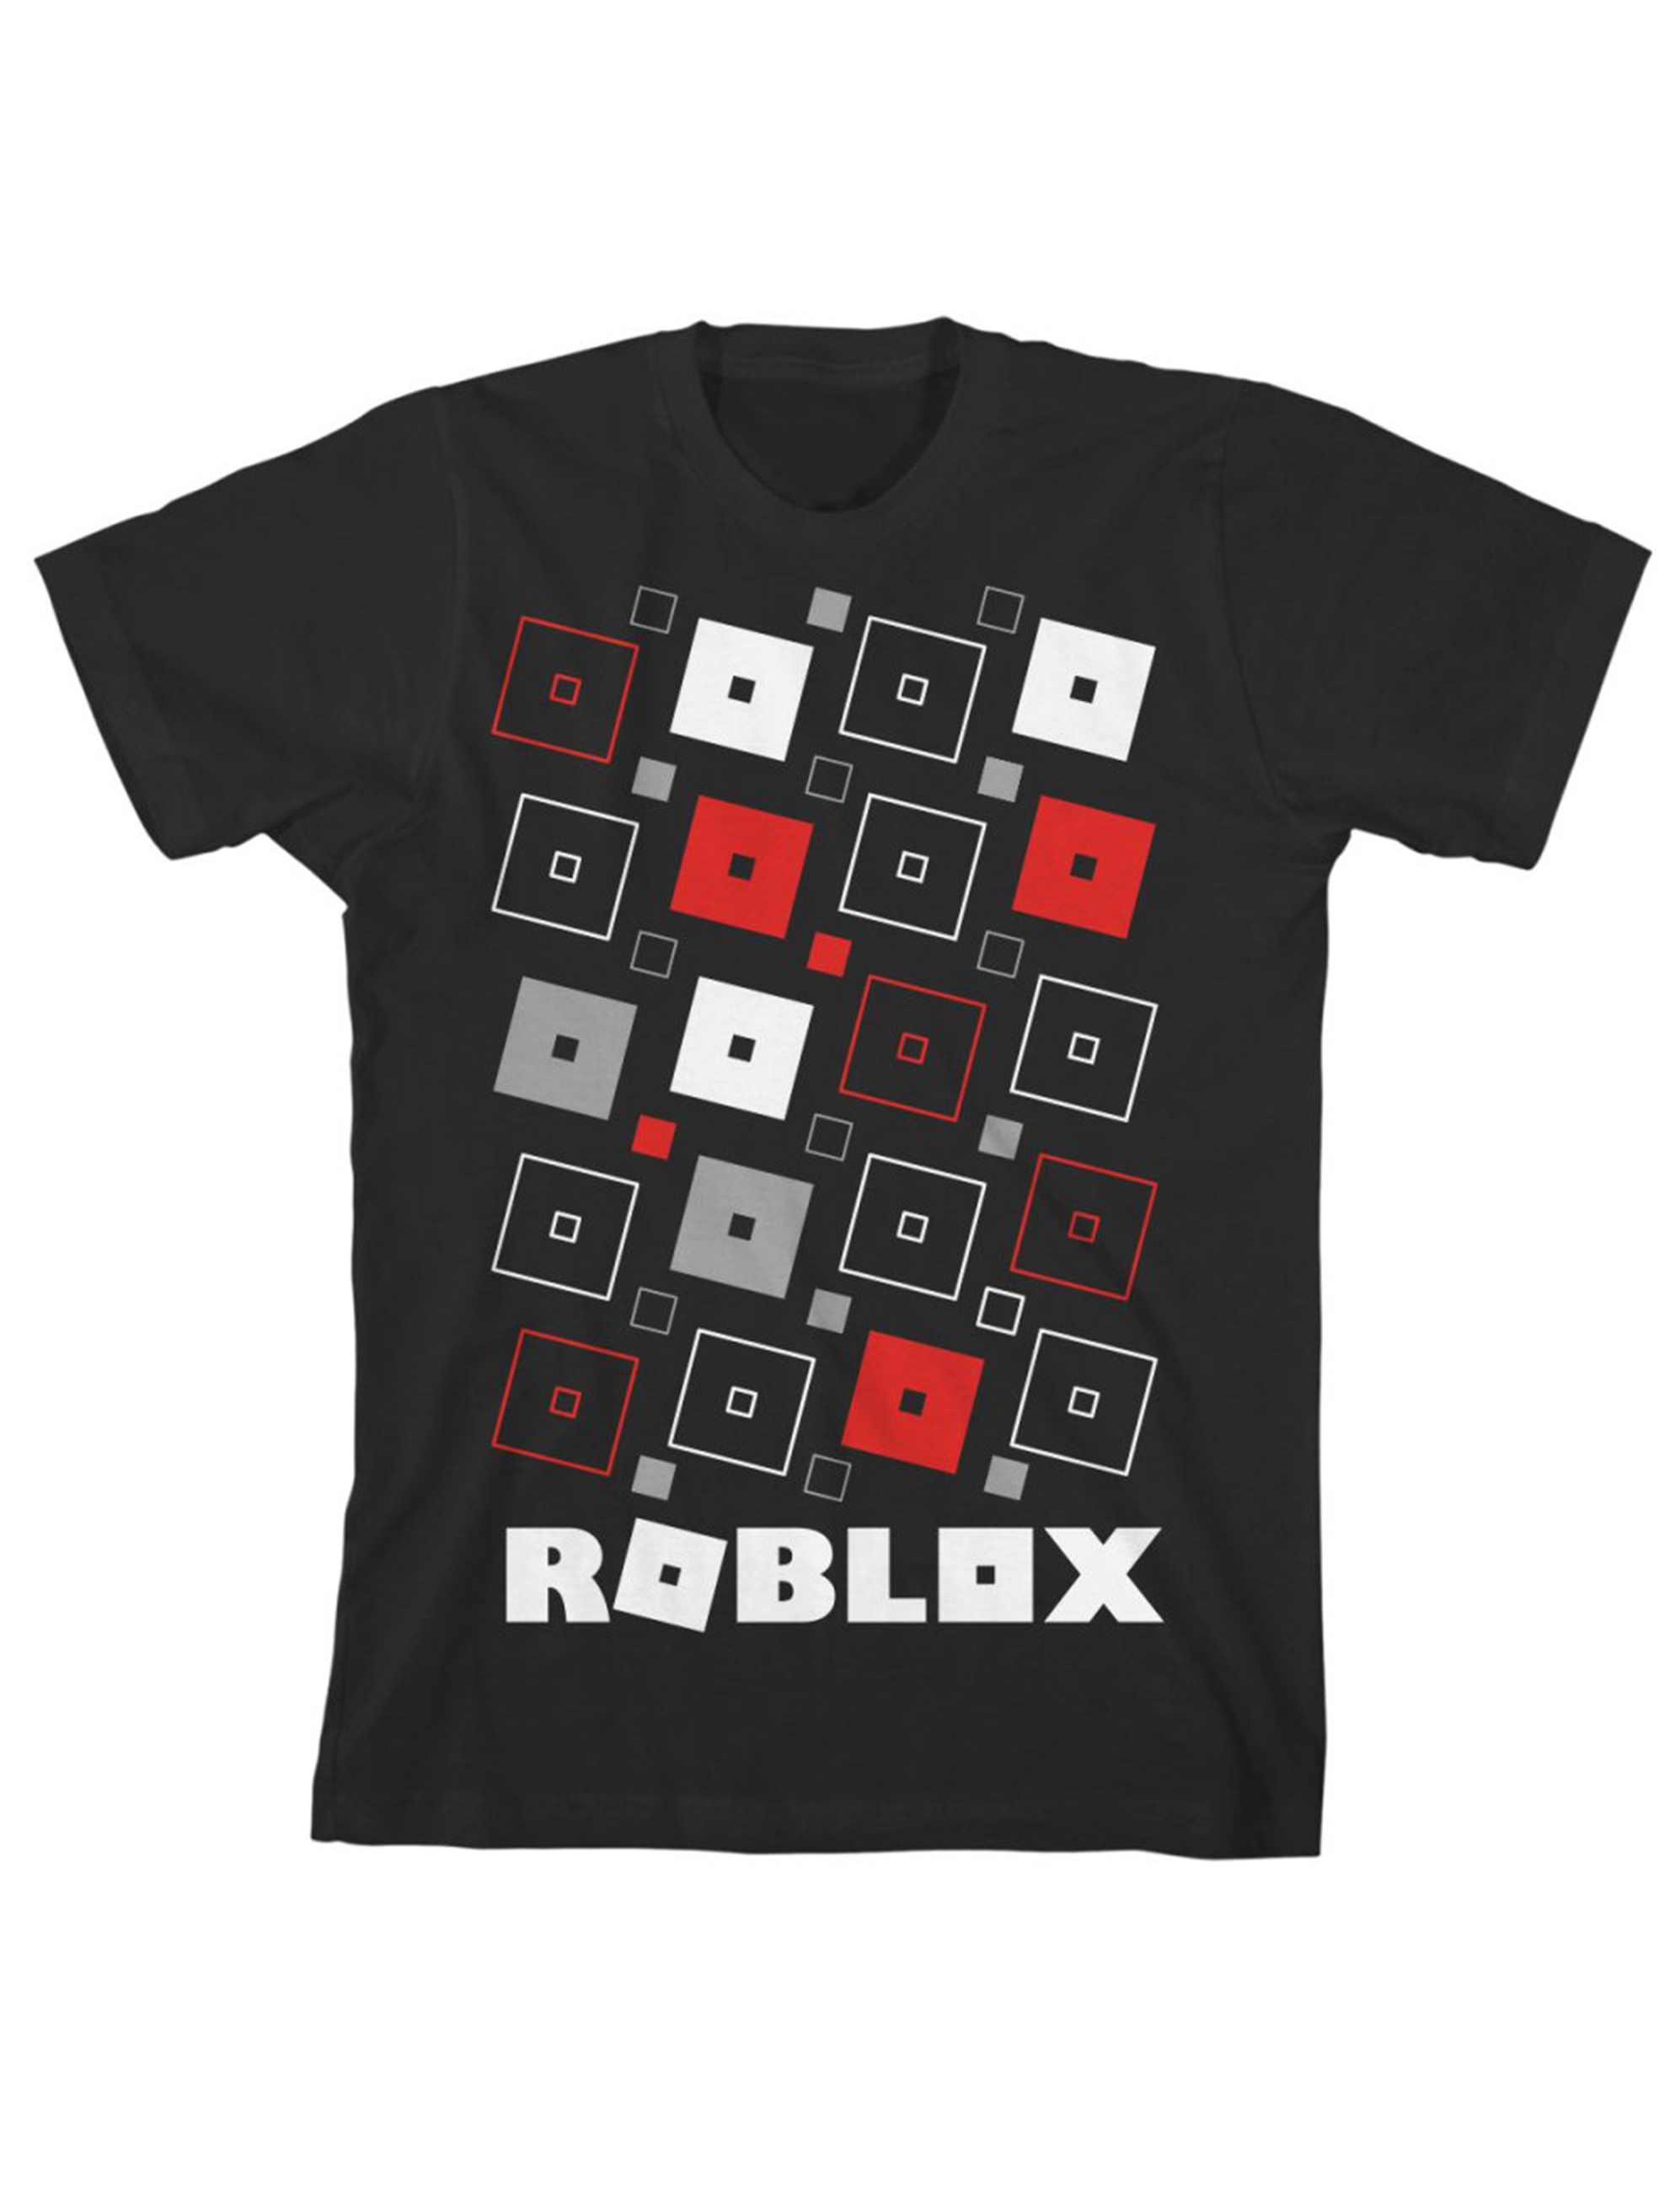 Cool t-shirts for roblox